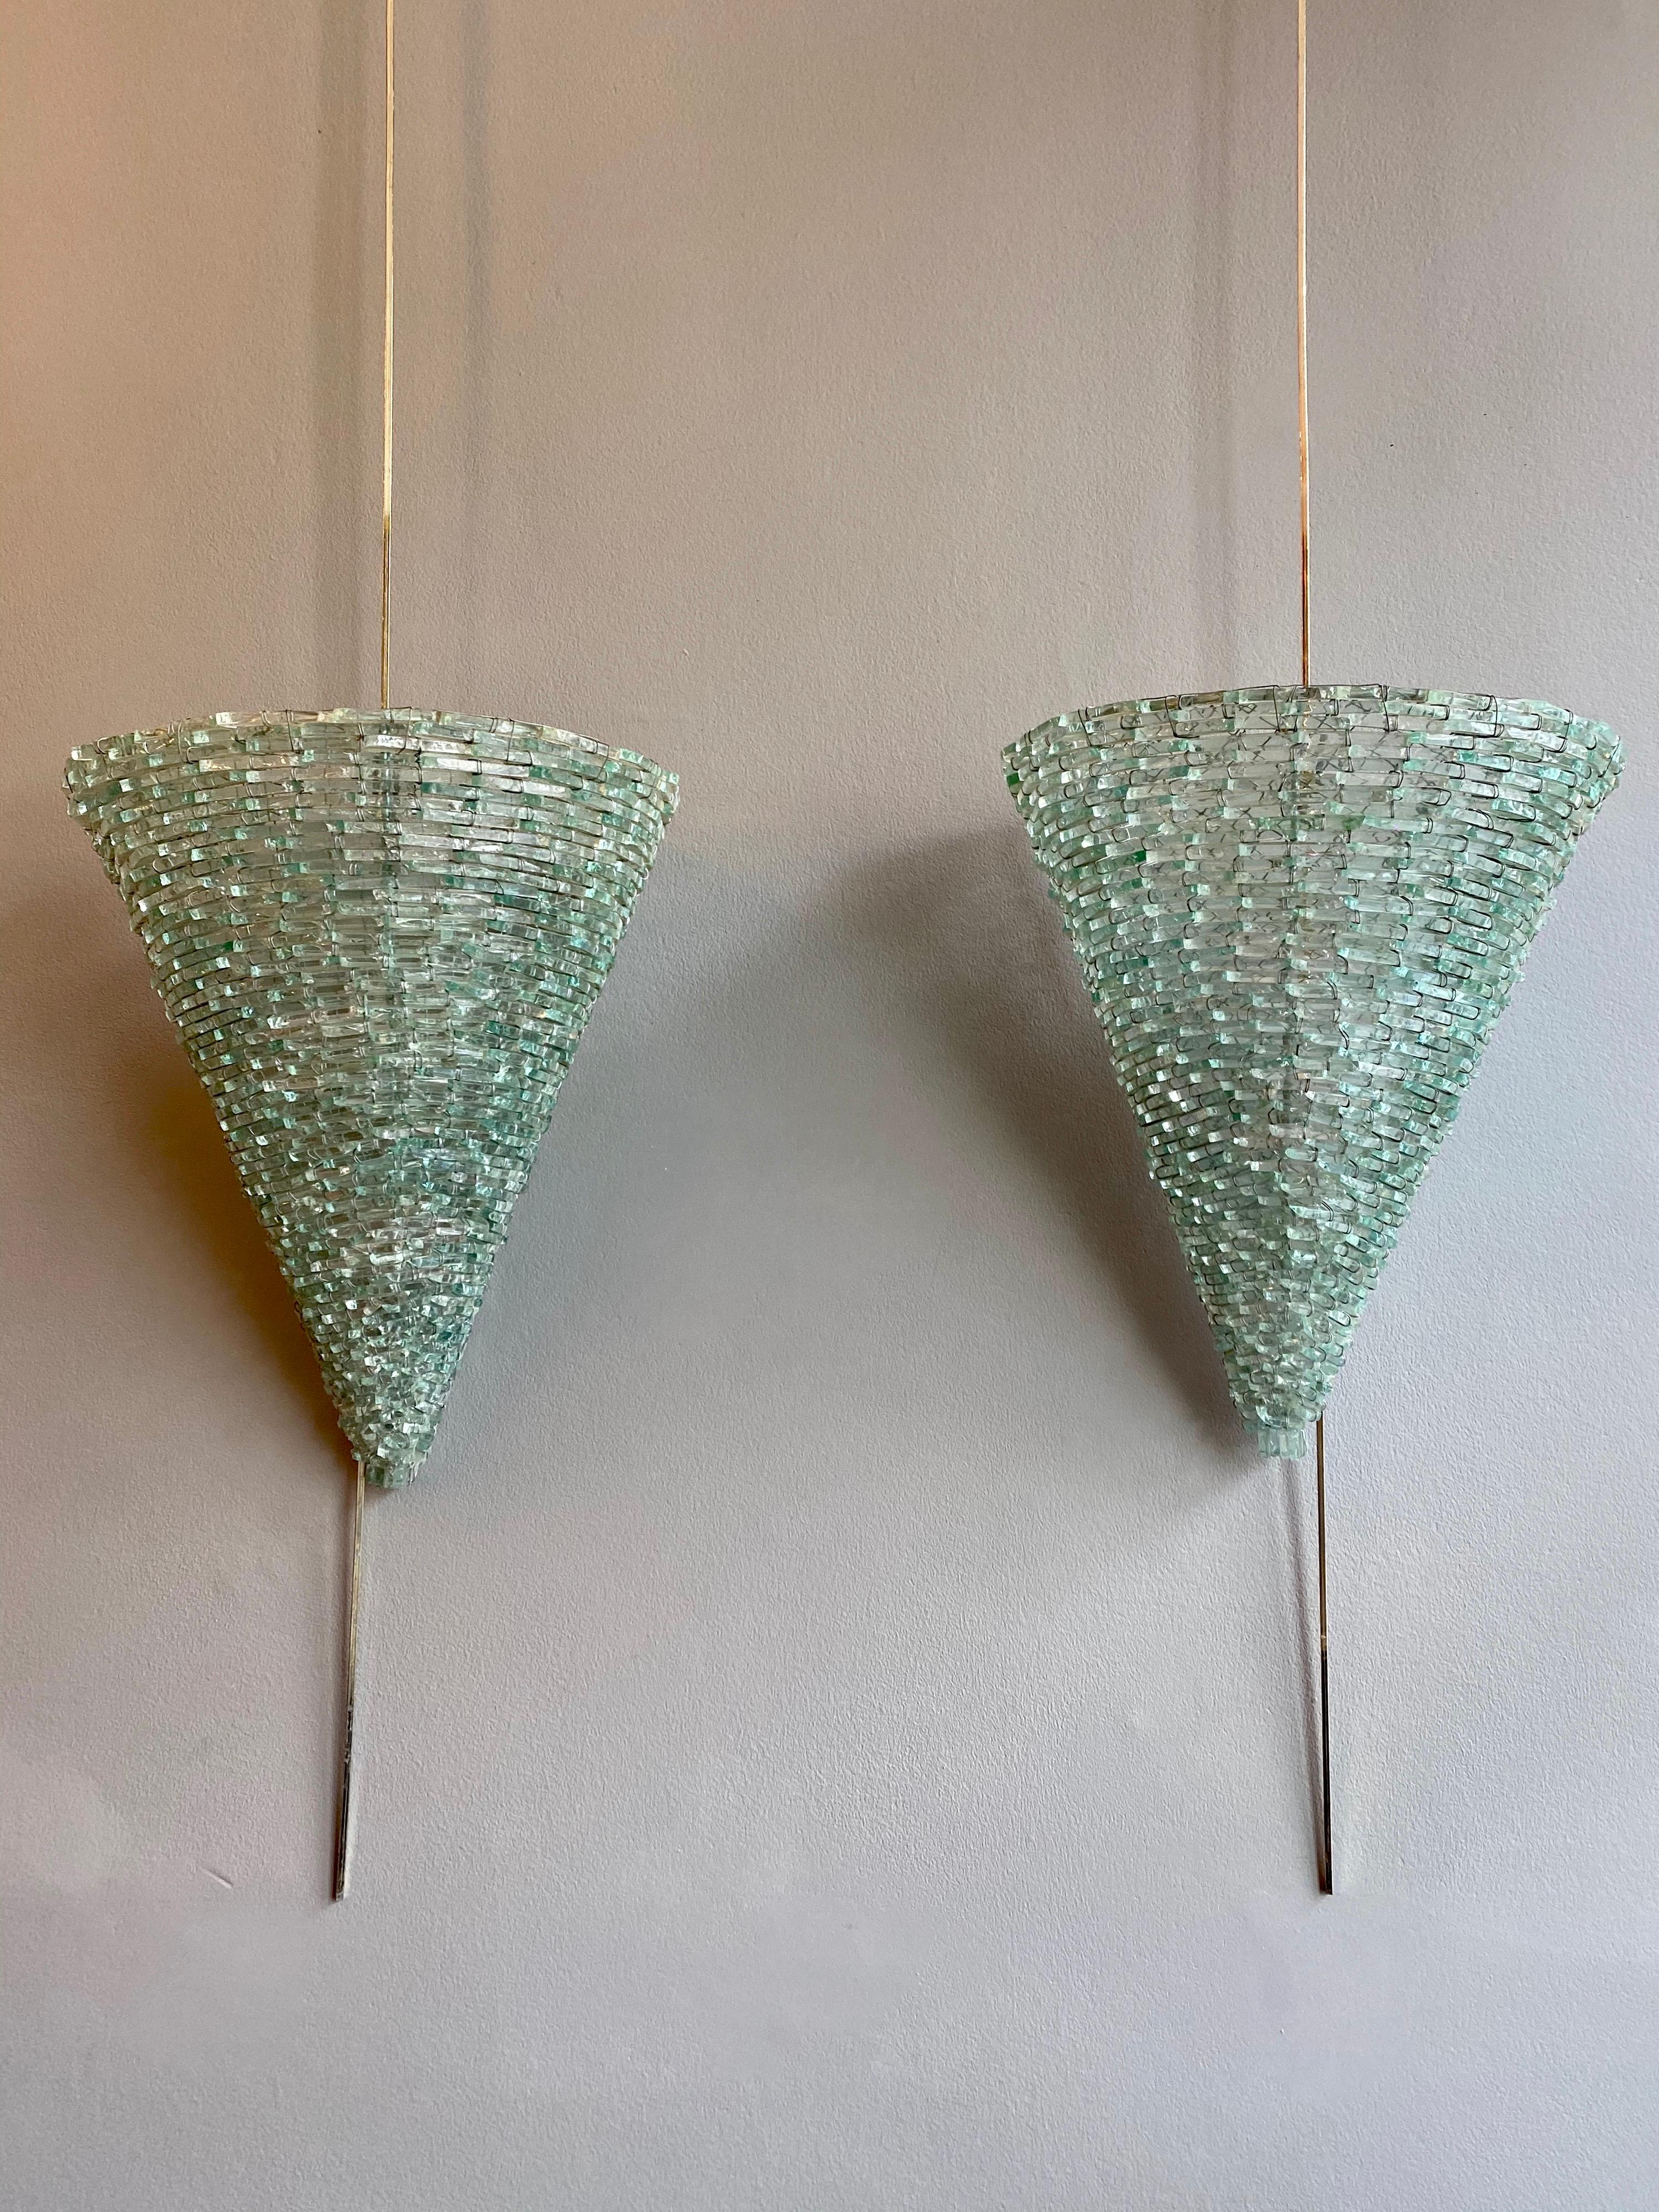 An unusual stylized pair of cone shaped Murano glass wall lights. Built up of small cut pieces on a metal frame, Italian, circa 1960s.